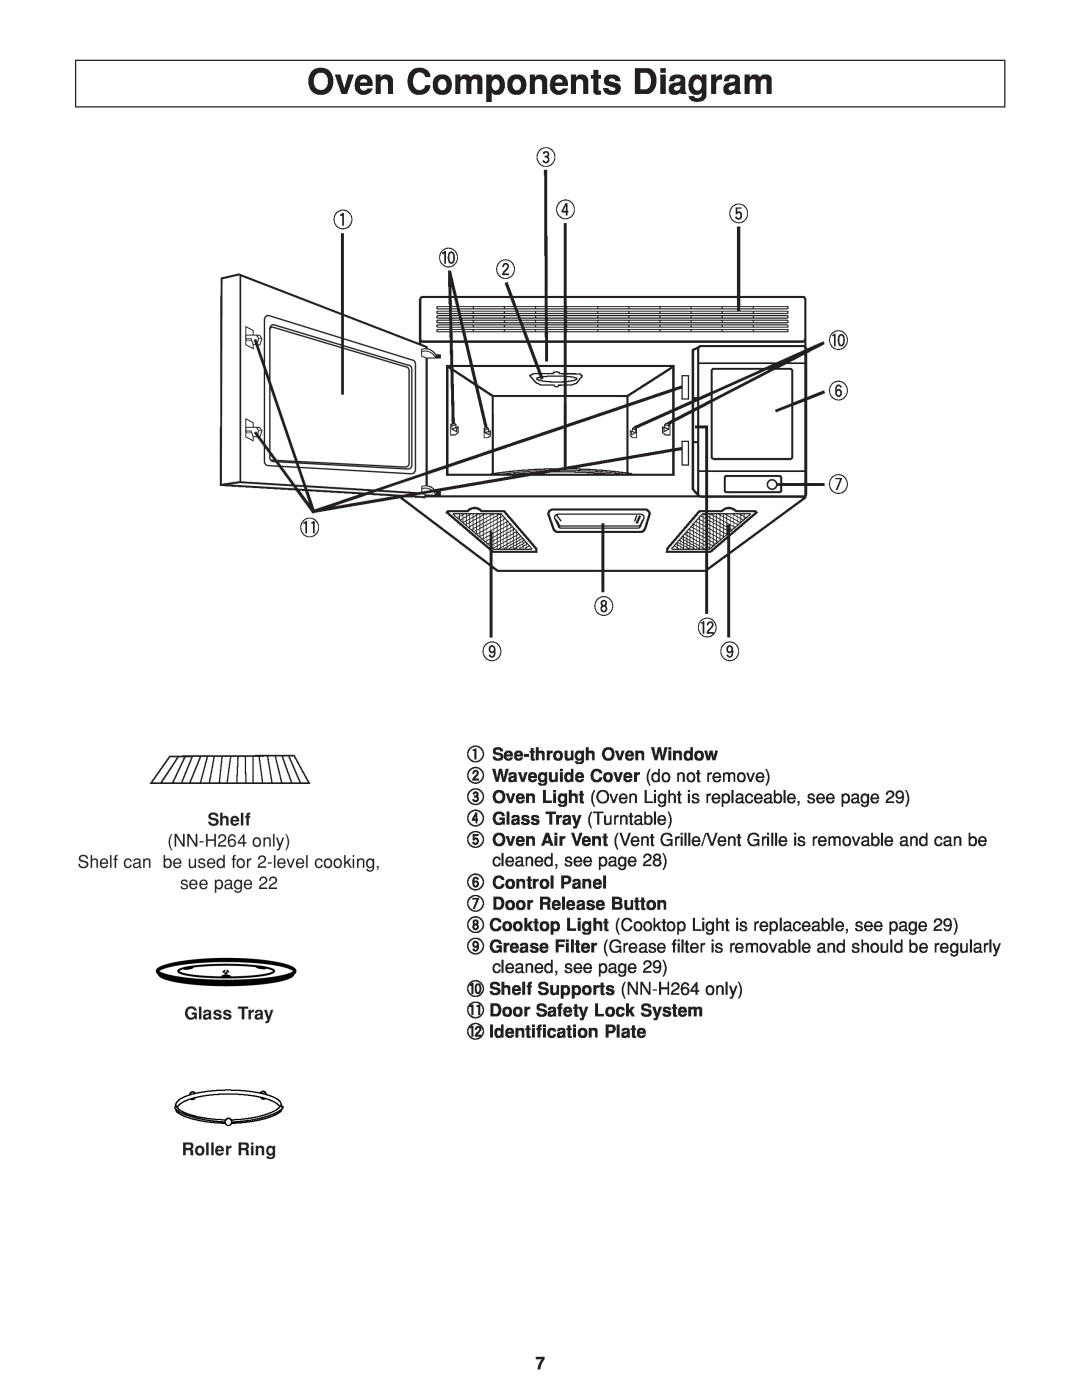 Panasonic NN-H264 important safety instructions Oven Components Diagram 